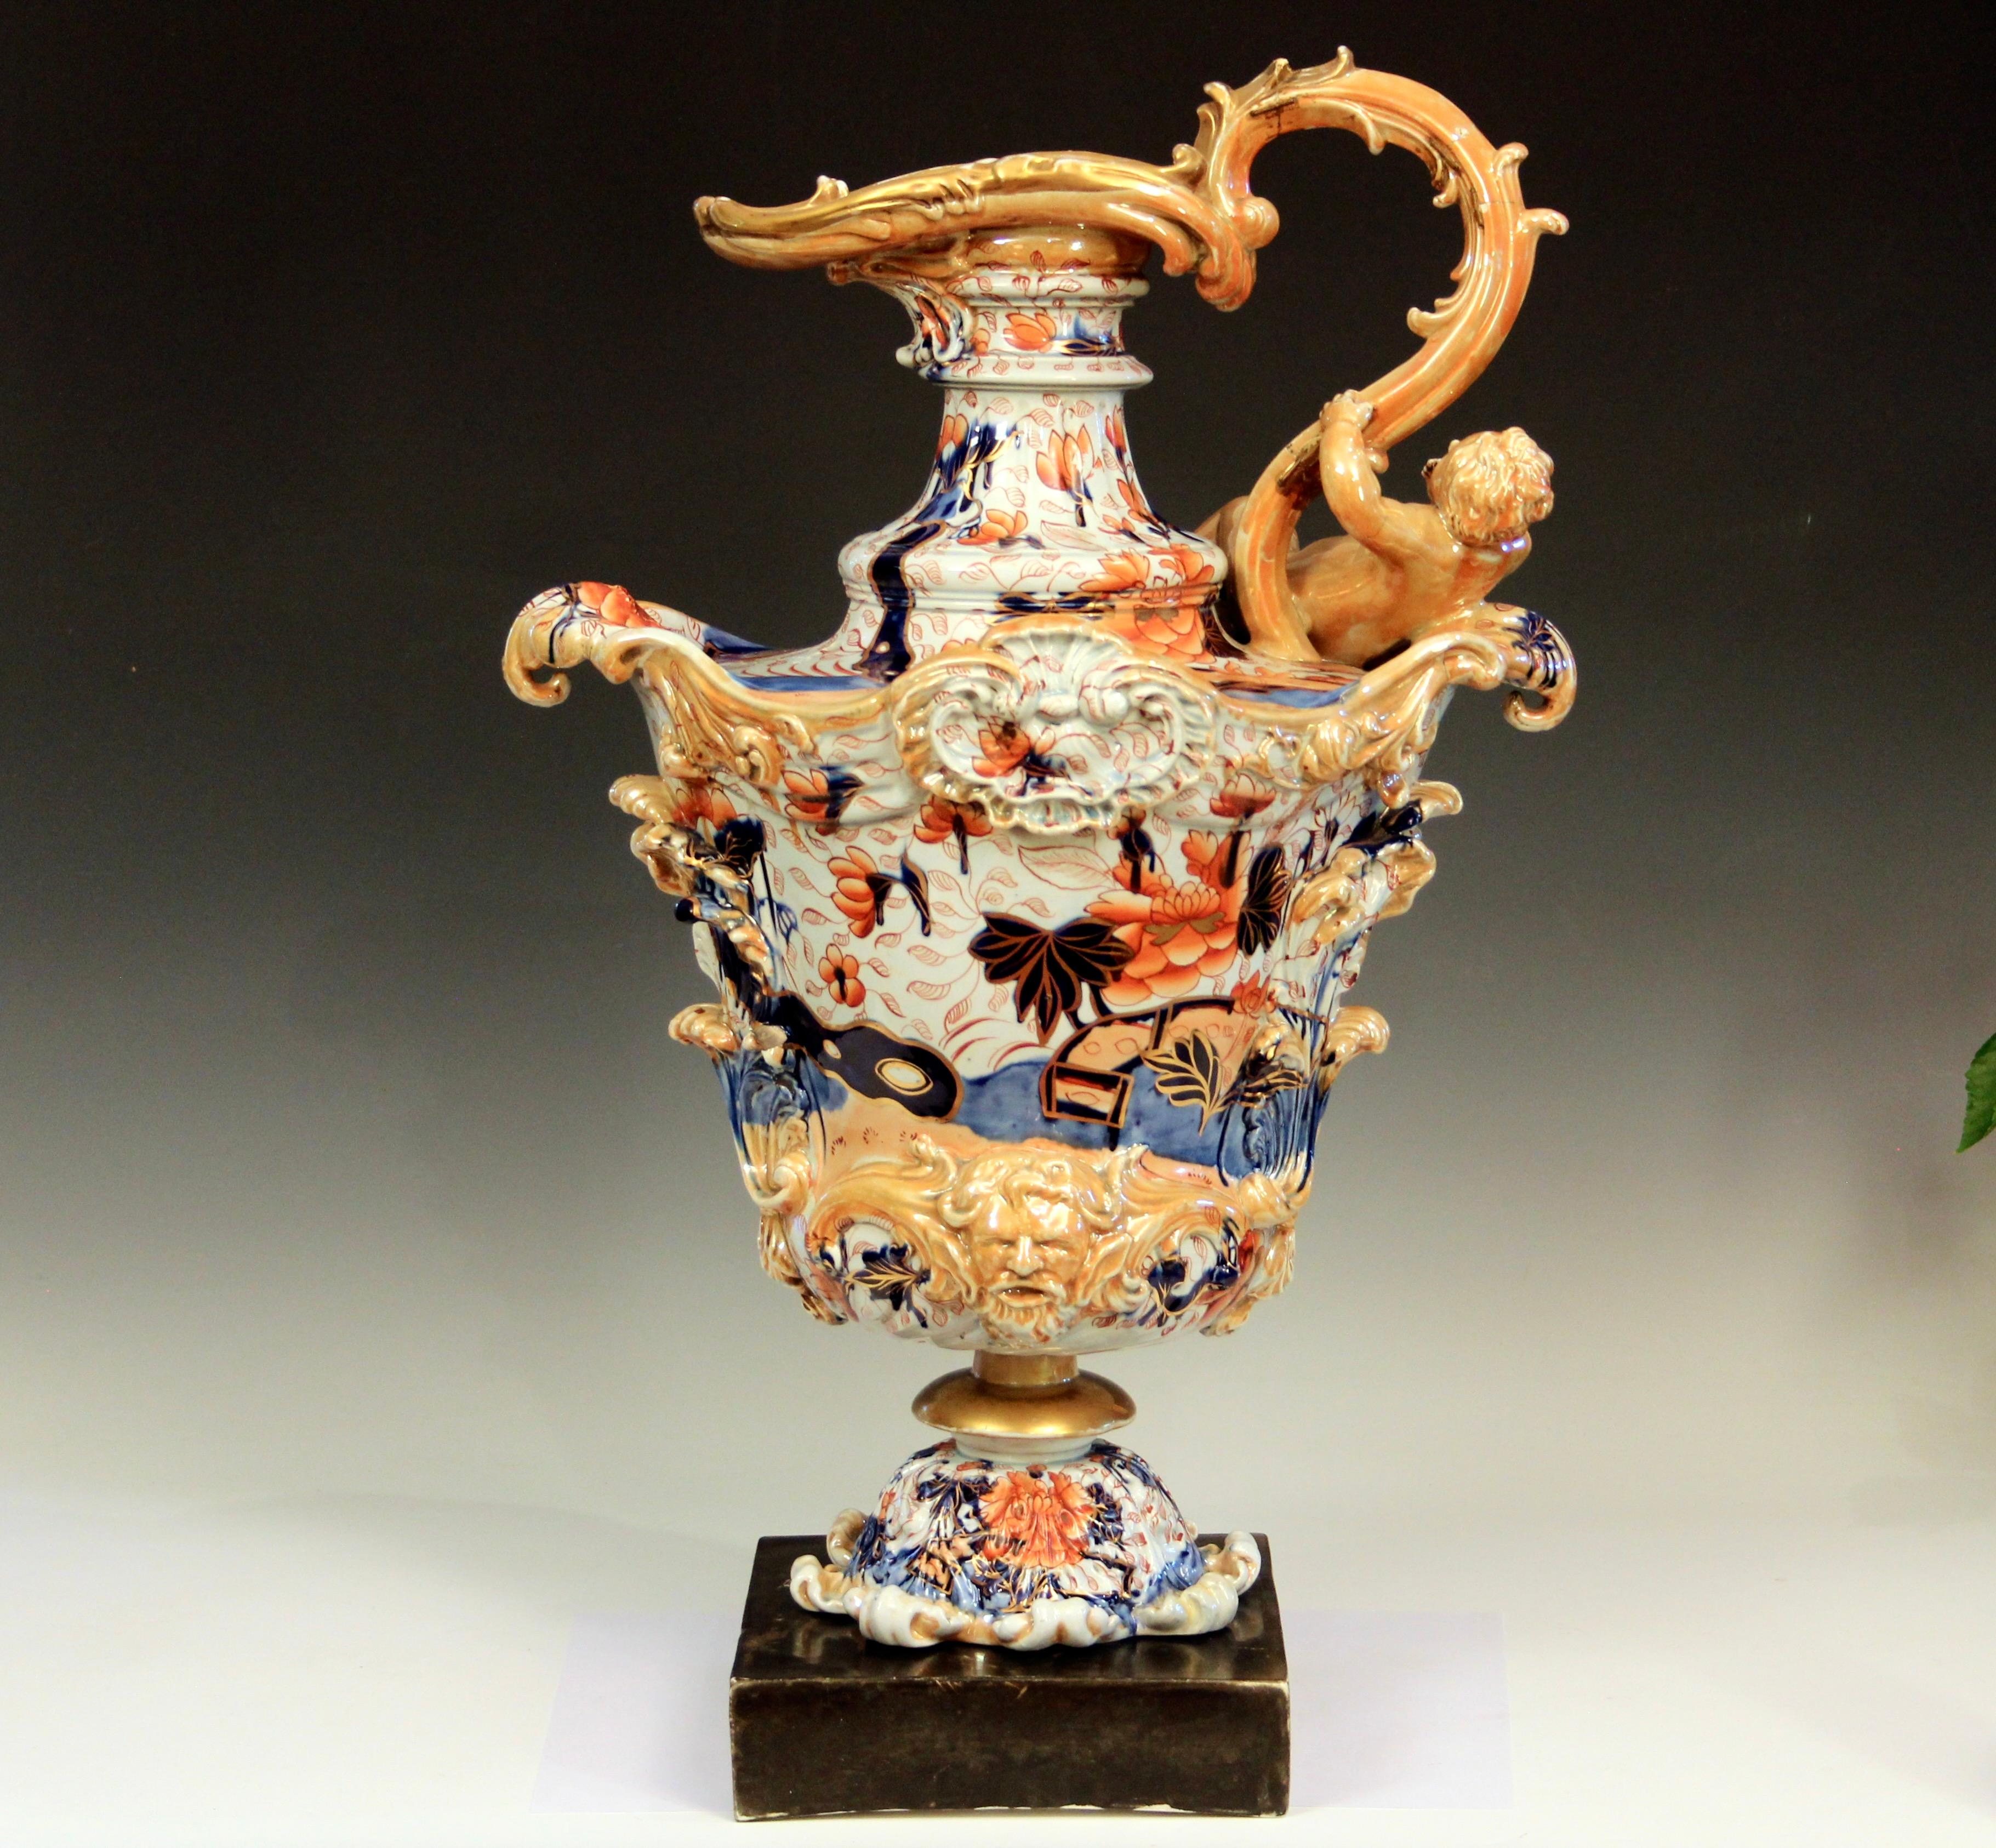 Monumental Antique English Mason's Ironstone ewer in Japan imari pattern, Circa 1820's. Unmarked. Bolted to a solid 2